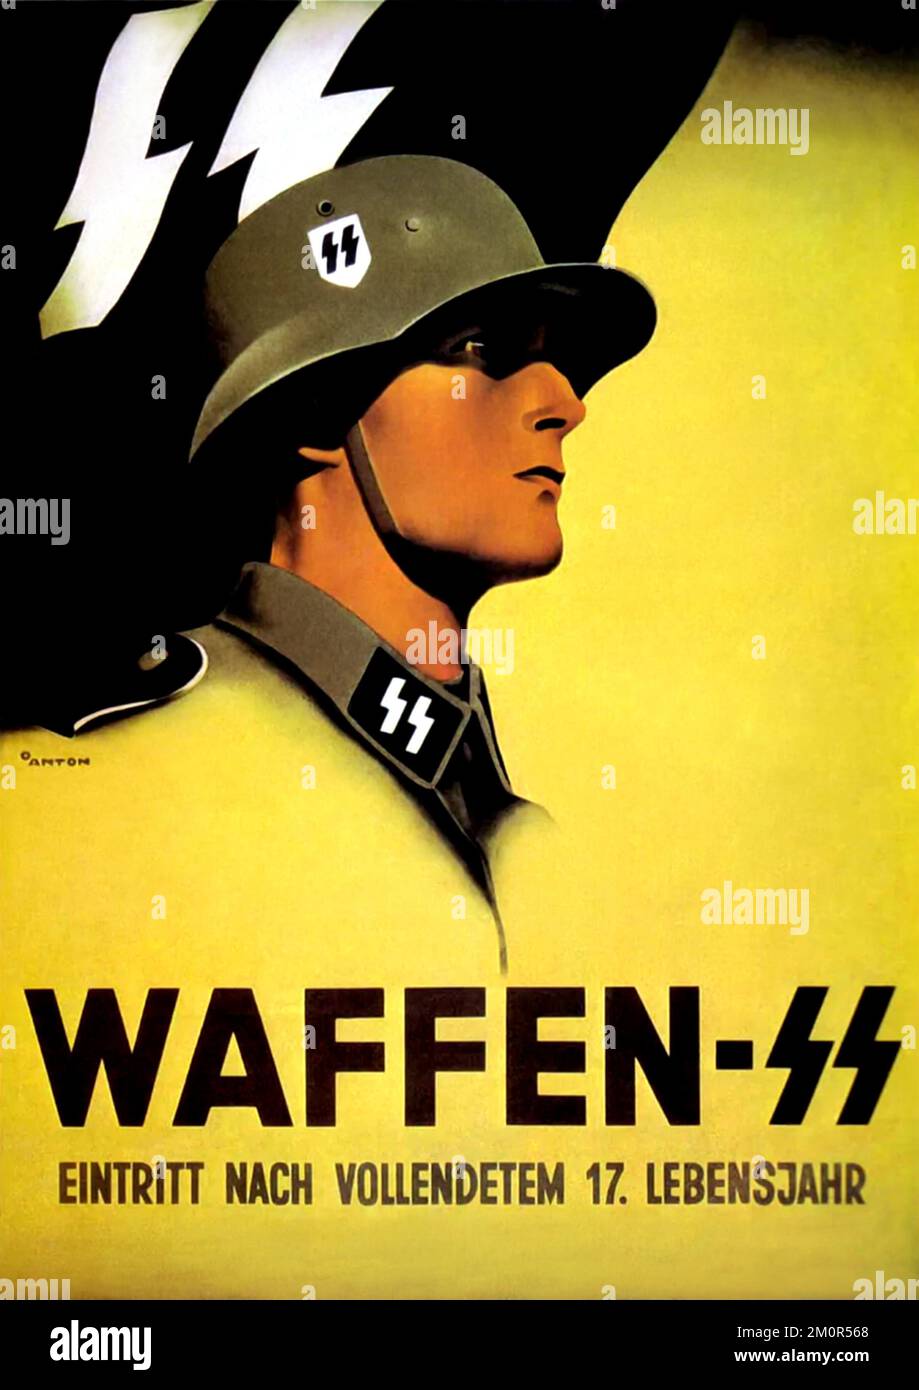 1935 ca, GERMANY  : The german Fuhrer dictator  ADOLF HITLER ( 1889 - 1945  ), leader of the Third Reich . Poster propaganda for the NAZIST military enlistment in WAFFEN SS  Schutzstaffel ( Eintritt Nach Vollendetem 17 . Lebensjahr - trad: Entry After Turning 17 . age ). National Socialist organization, the most important carrier of terror and the policy of extermination of the National Socialist state was the SS . Designed by illustrator ANTON .  - WWII - NAZI - NAZIST -NAZISM - NAZISTA - NAZISMO - SECONDA GUERRA MONDIALE - WW2 - WORLD WAR II - dittatore - POLITICA - POLITICO - profilo - prof Stock Photo